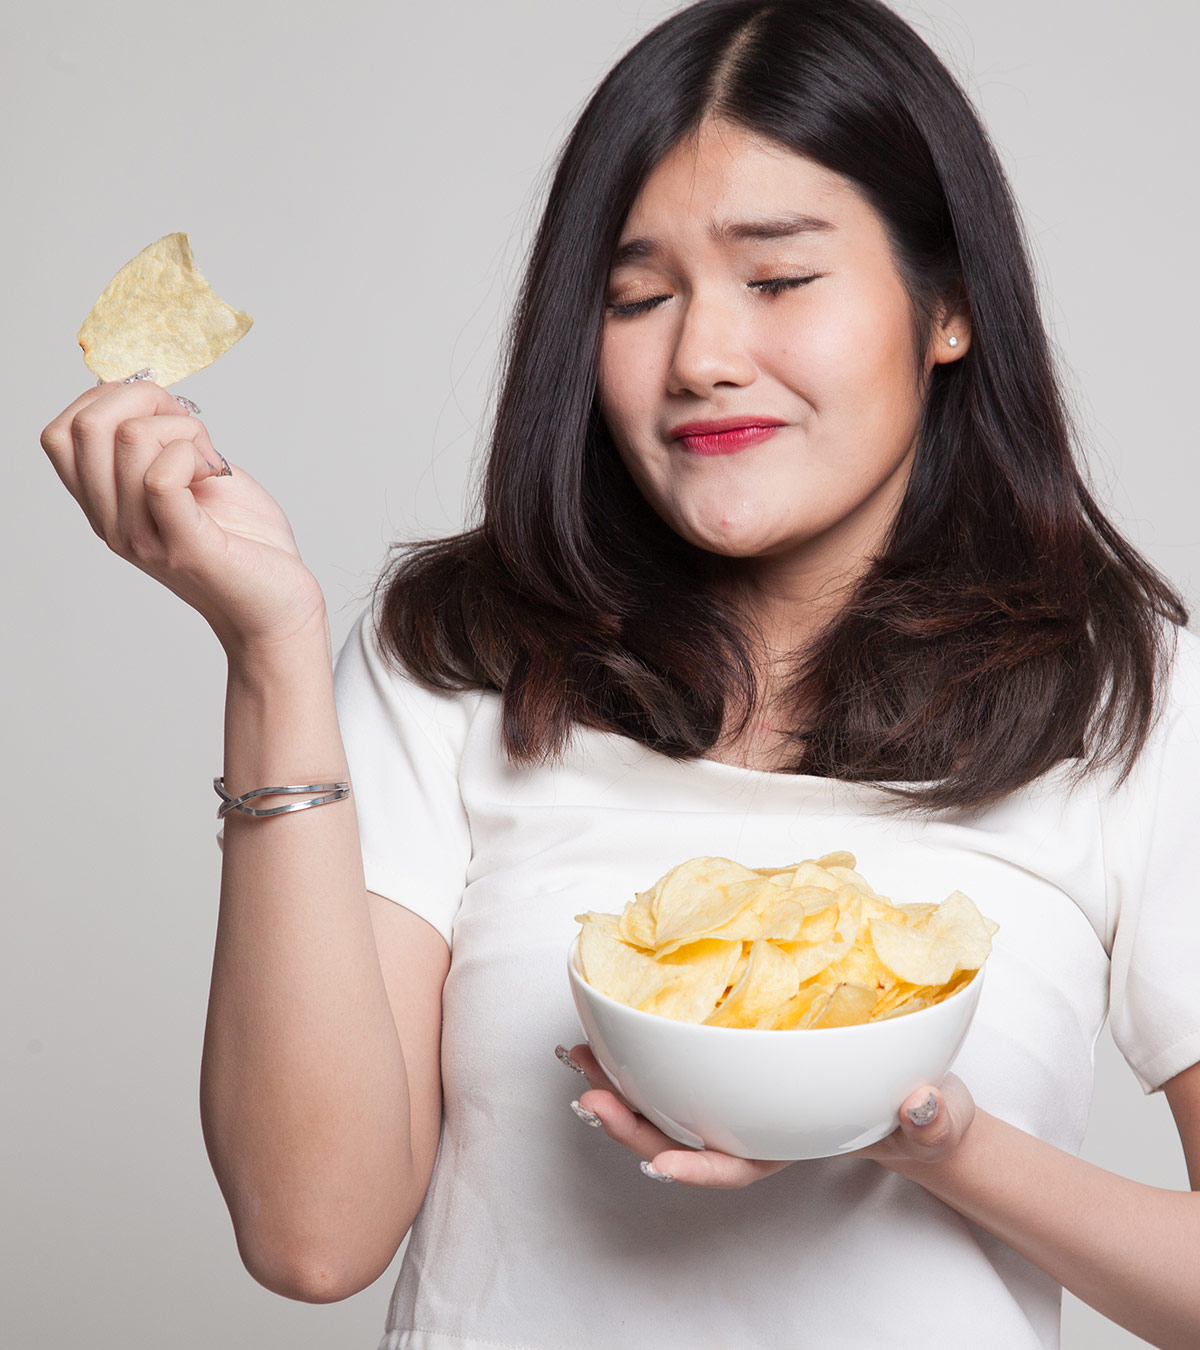 Potatoes During Pregnancy: Do They Trigger Gestational Diabetes?